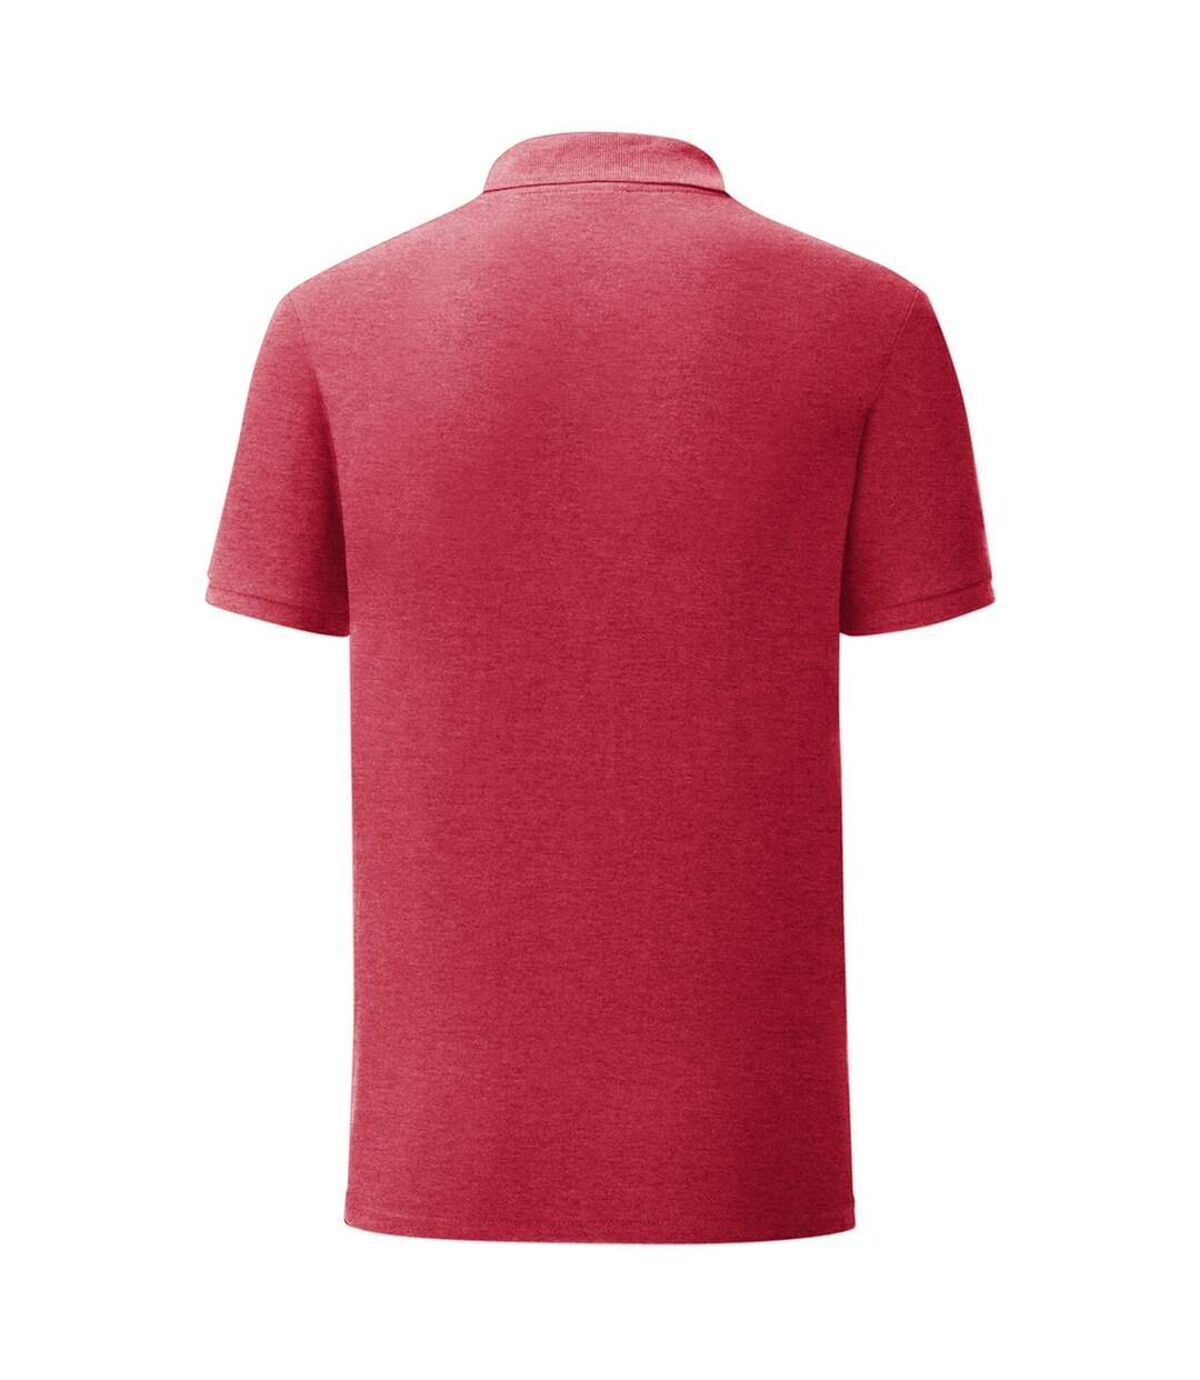 Fruit Of The Loom Mens Iconic Pique Polo Shirt (Heather Red)